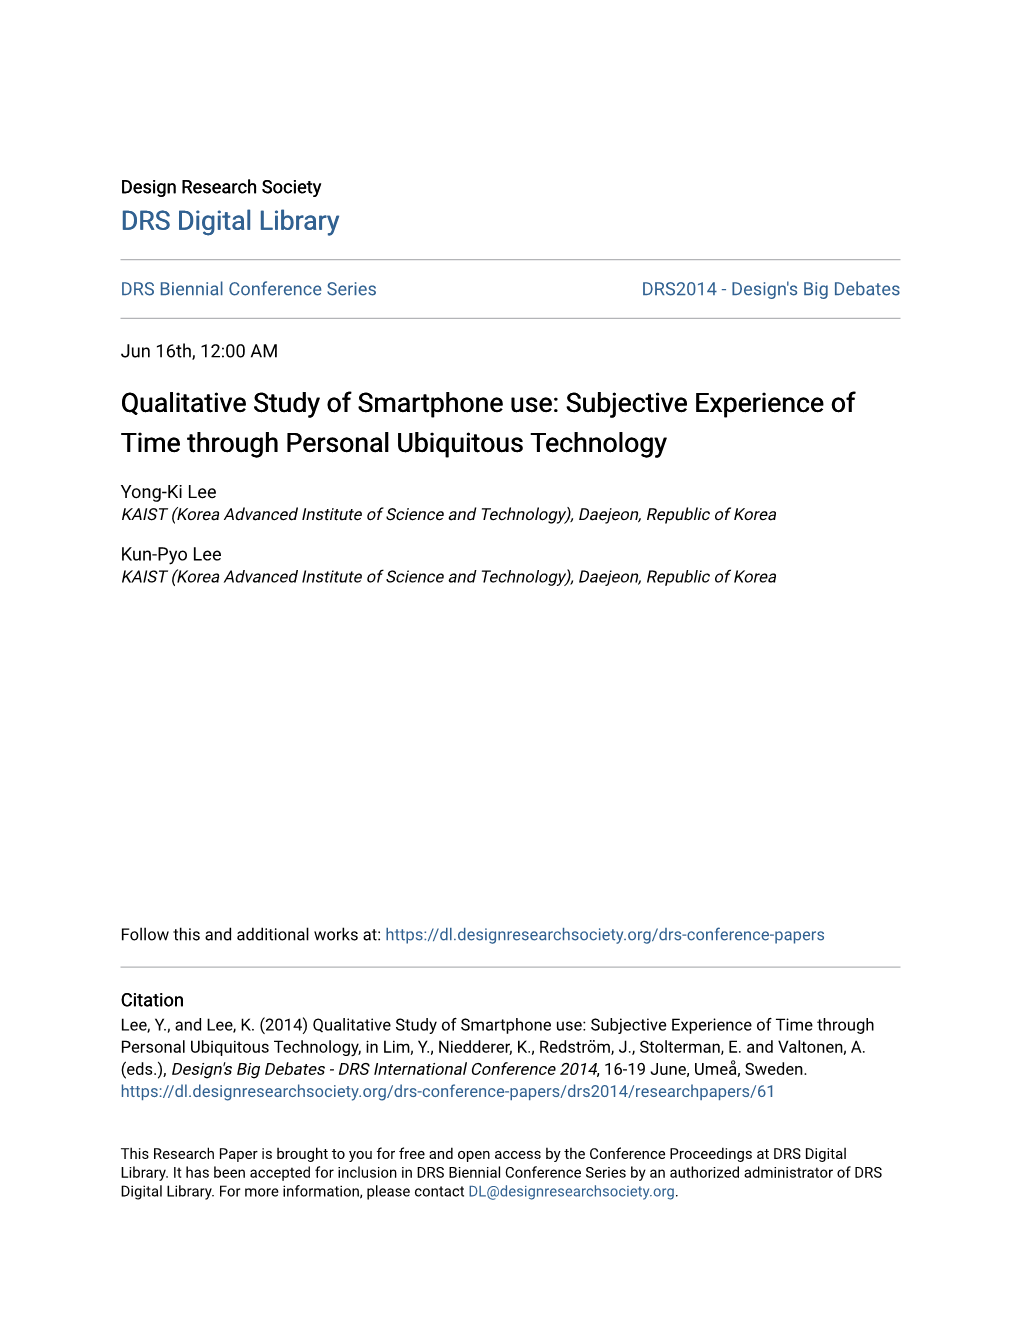 Qualitative Study of Smartphone Use: Subjective Experience of Time Through Personal Ubiquitous Technology